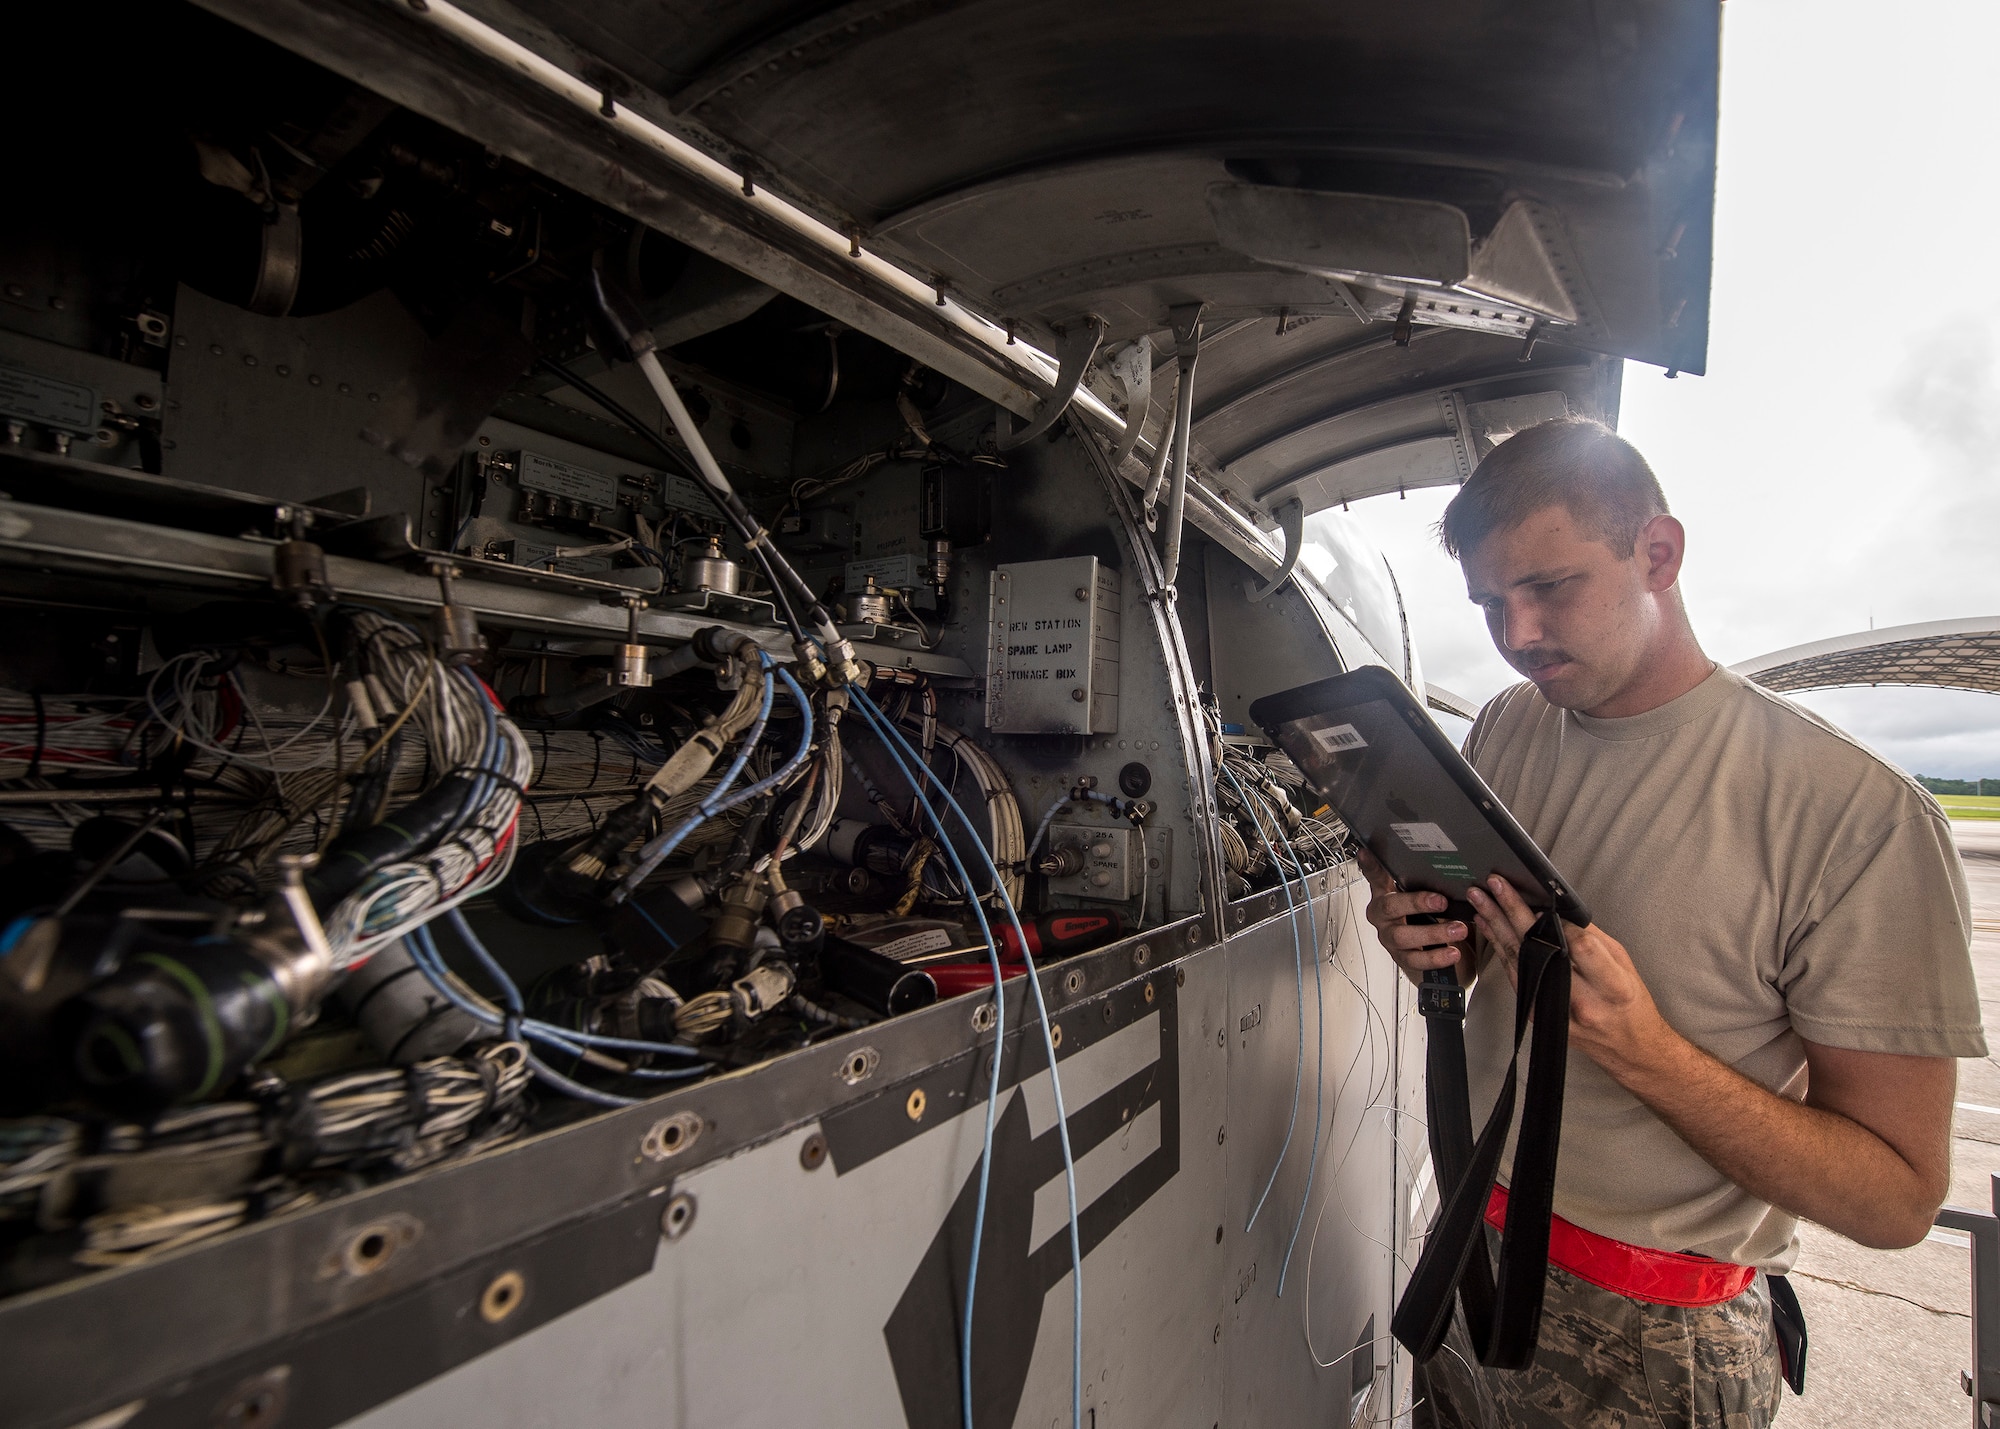 Senior Airman Andrew Bobick, 75th Aircraft Maintenance Unit avionics journeyman, reads a technical order during a sortie surge exercise, July 24, 2019, at Moody Air Force Base, Ga. The exercise was conducted to determine Airmen's abilities to perform effectively while generating combat or training sorties at an accelerated rate. Throughout the four-day surge, pilots and maintainers completed 131 sorties spanning approximately 152 flying hours. (U.S. Air Force photo by Airman 1st Class Eugene Oliver)